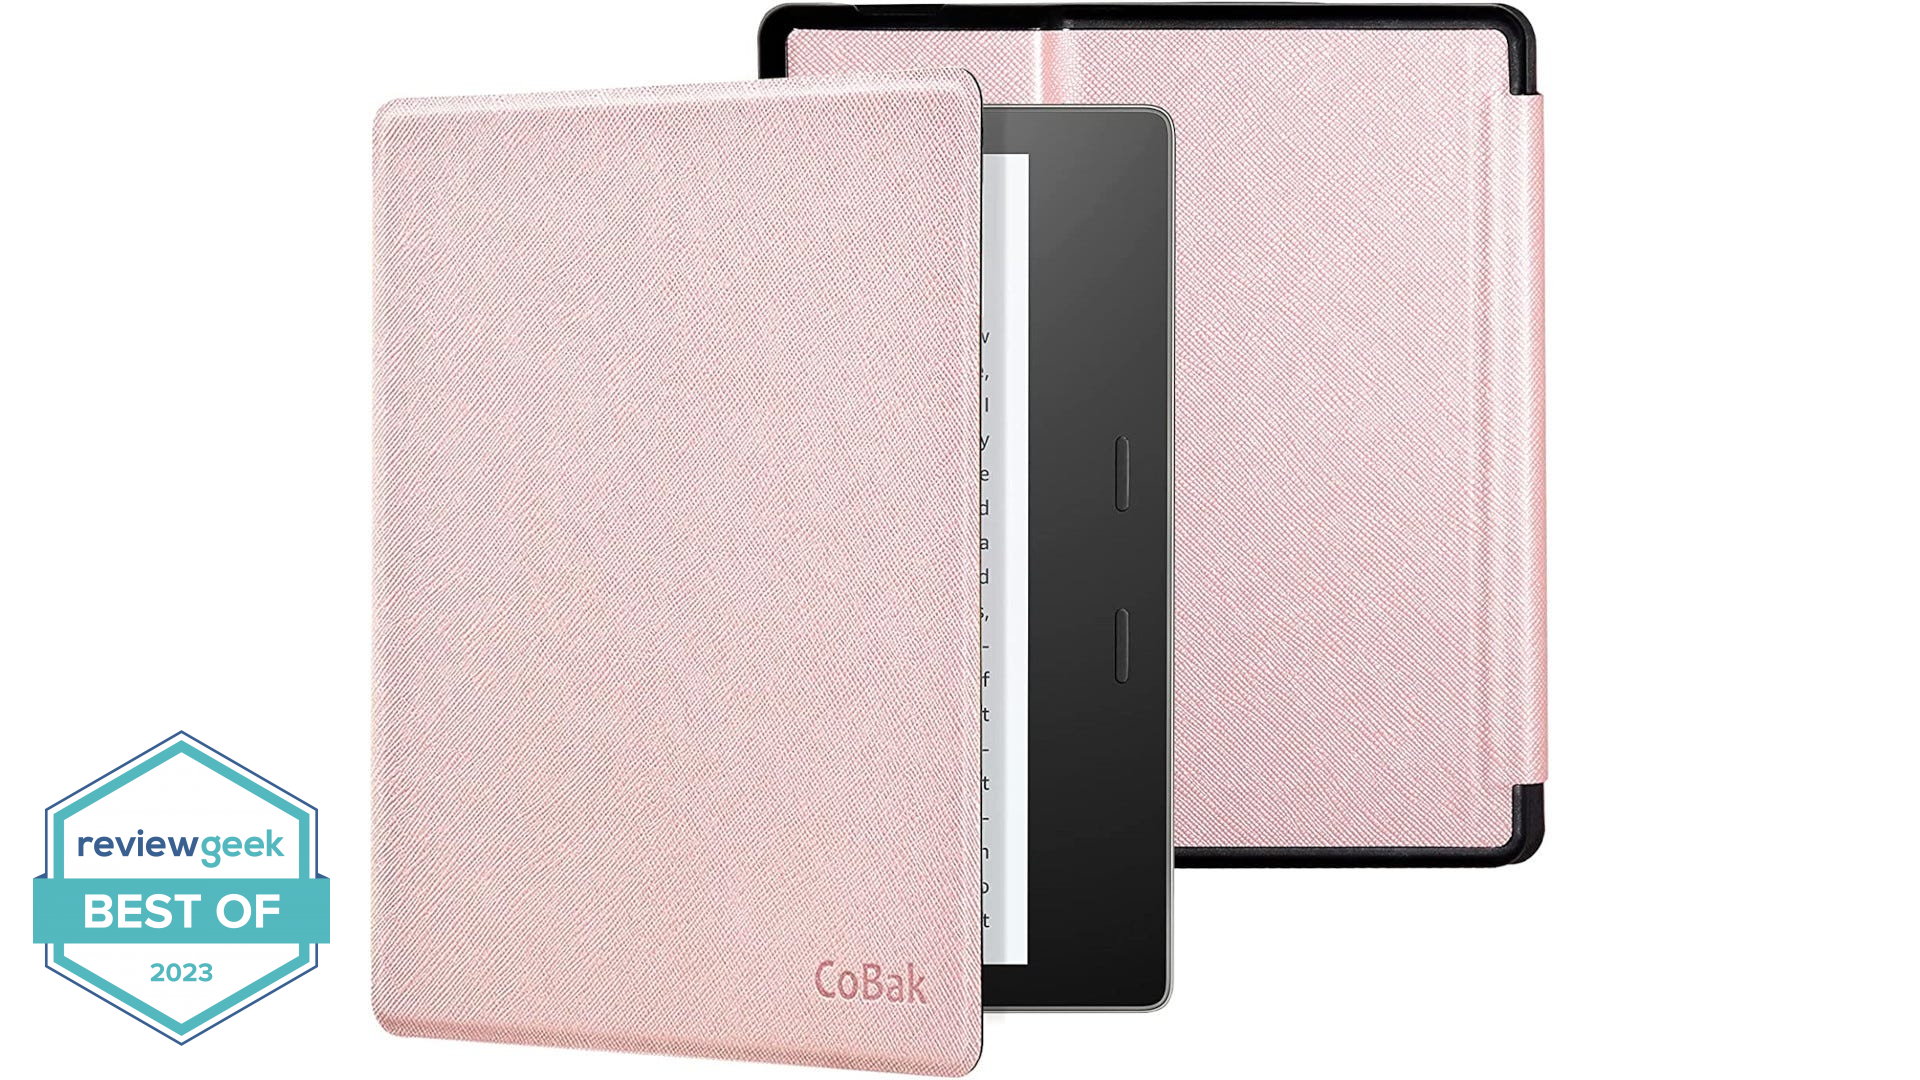 Two versions of a Kindle Oasis case are displayed. One is closed and the other is open.